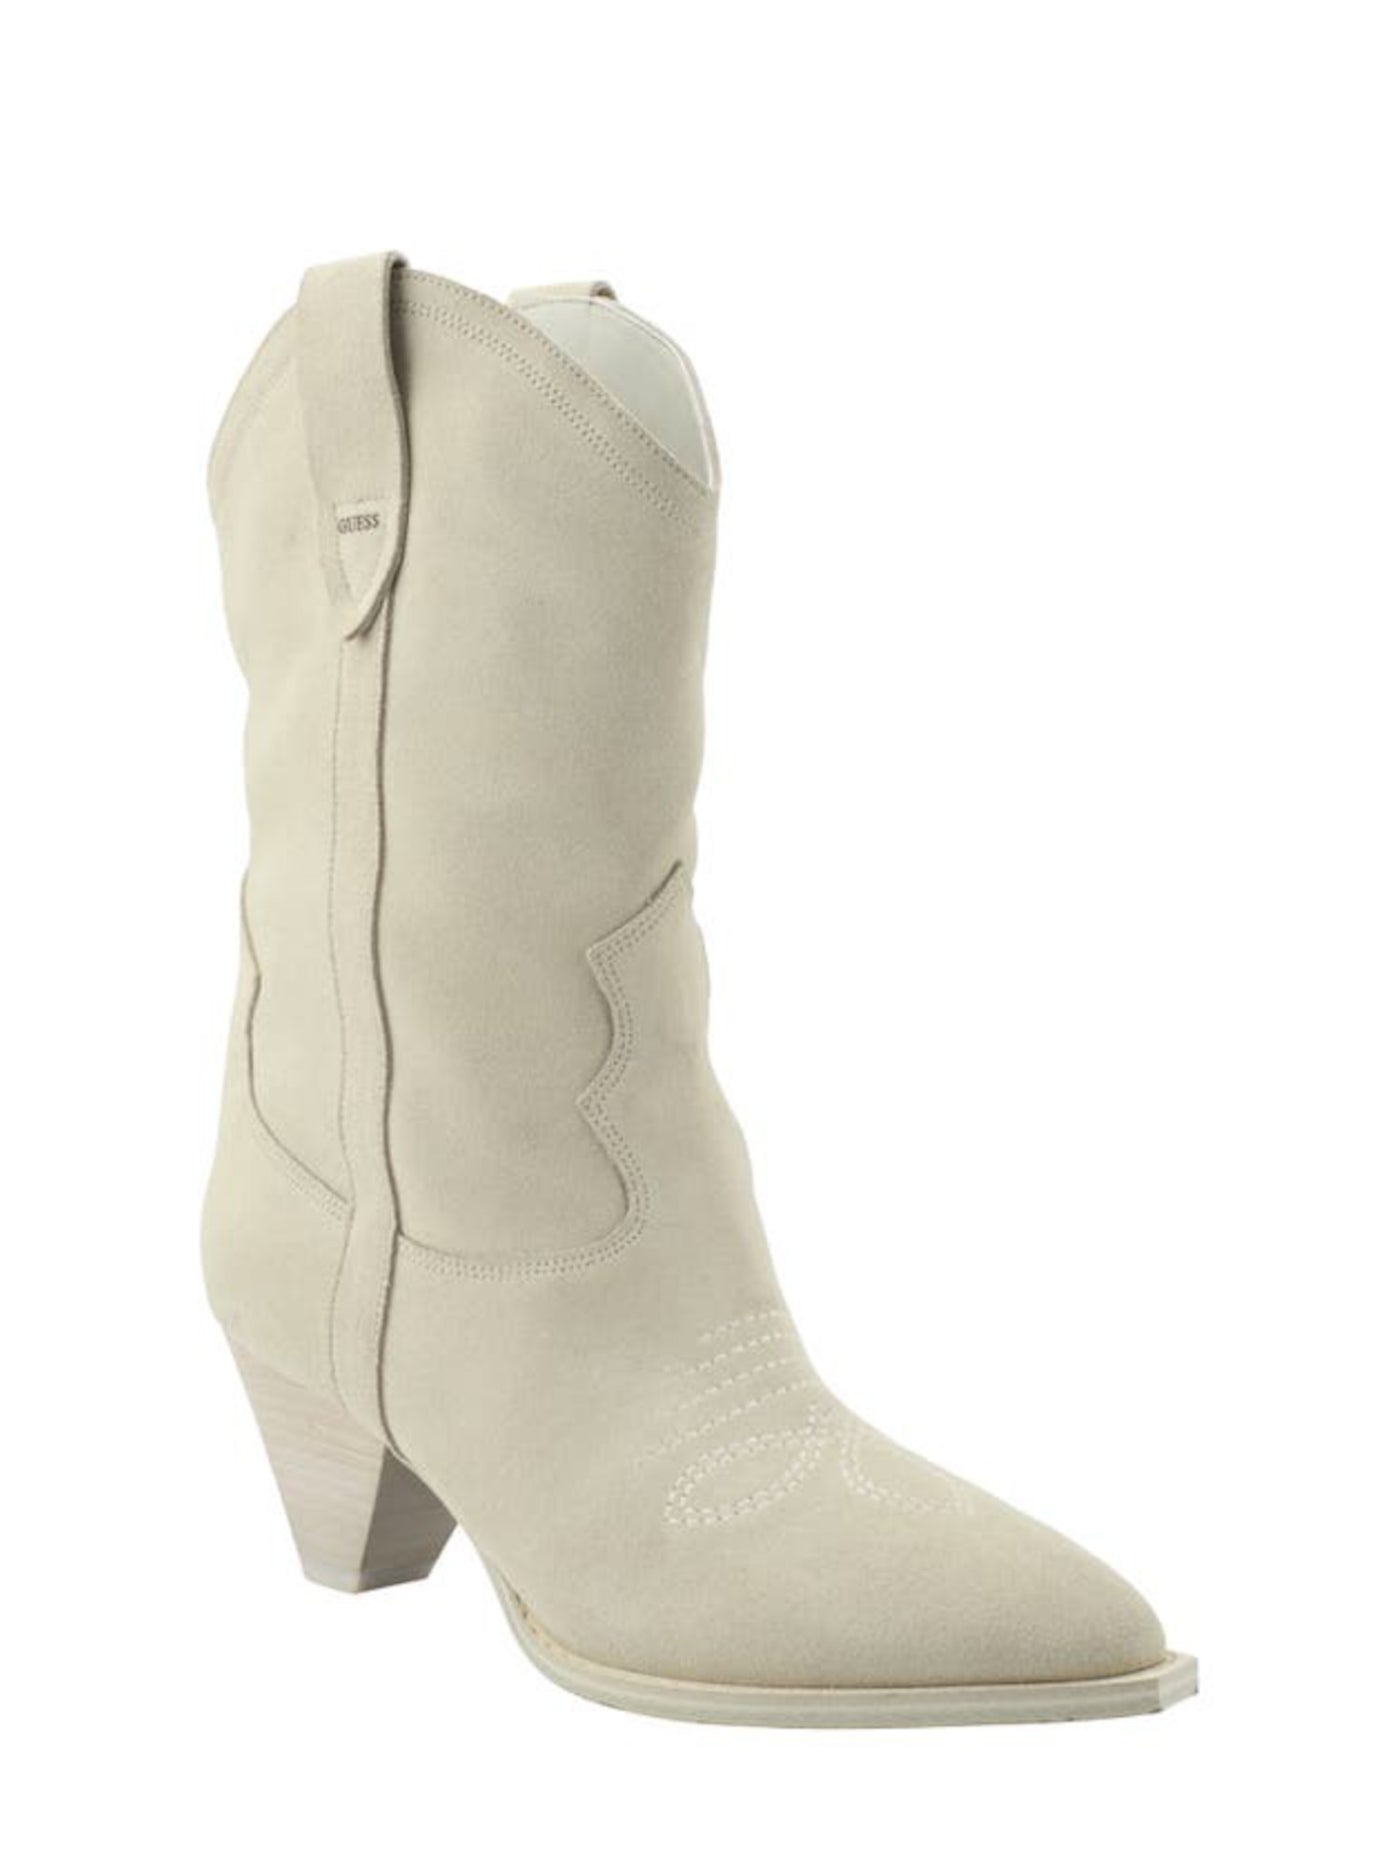 GUESS Womens Ivory Padded Odilia Round Toe Cone Heel Leather Western Boot 7 M